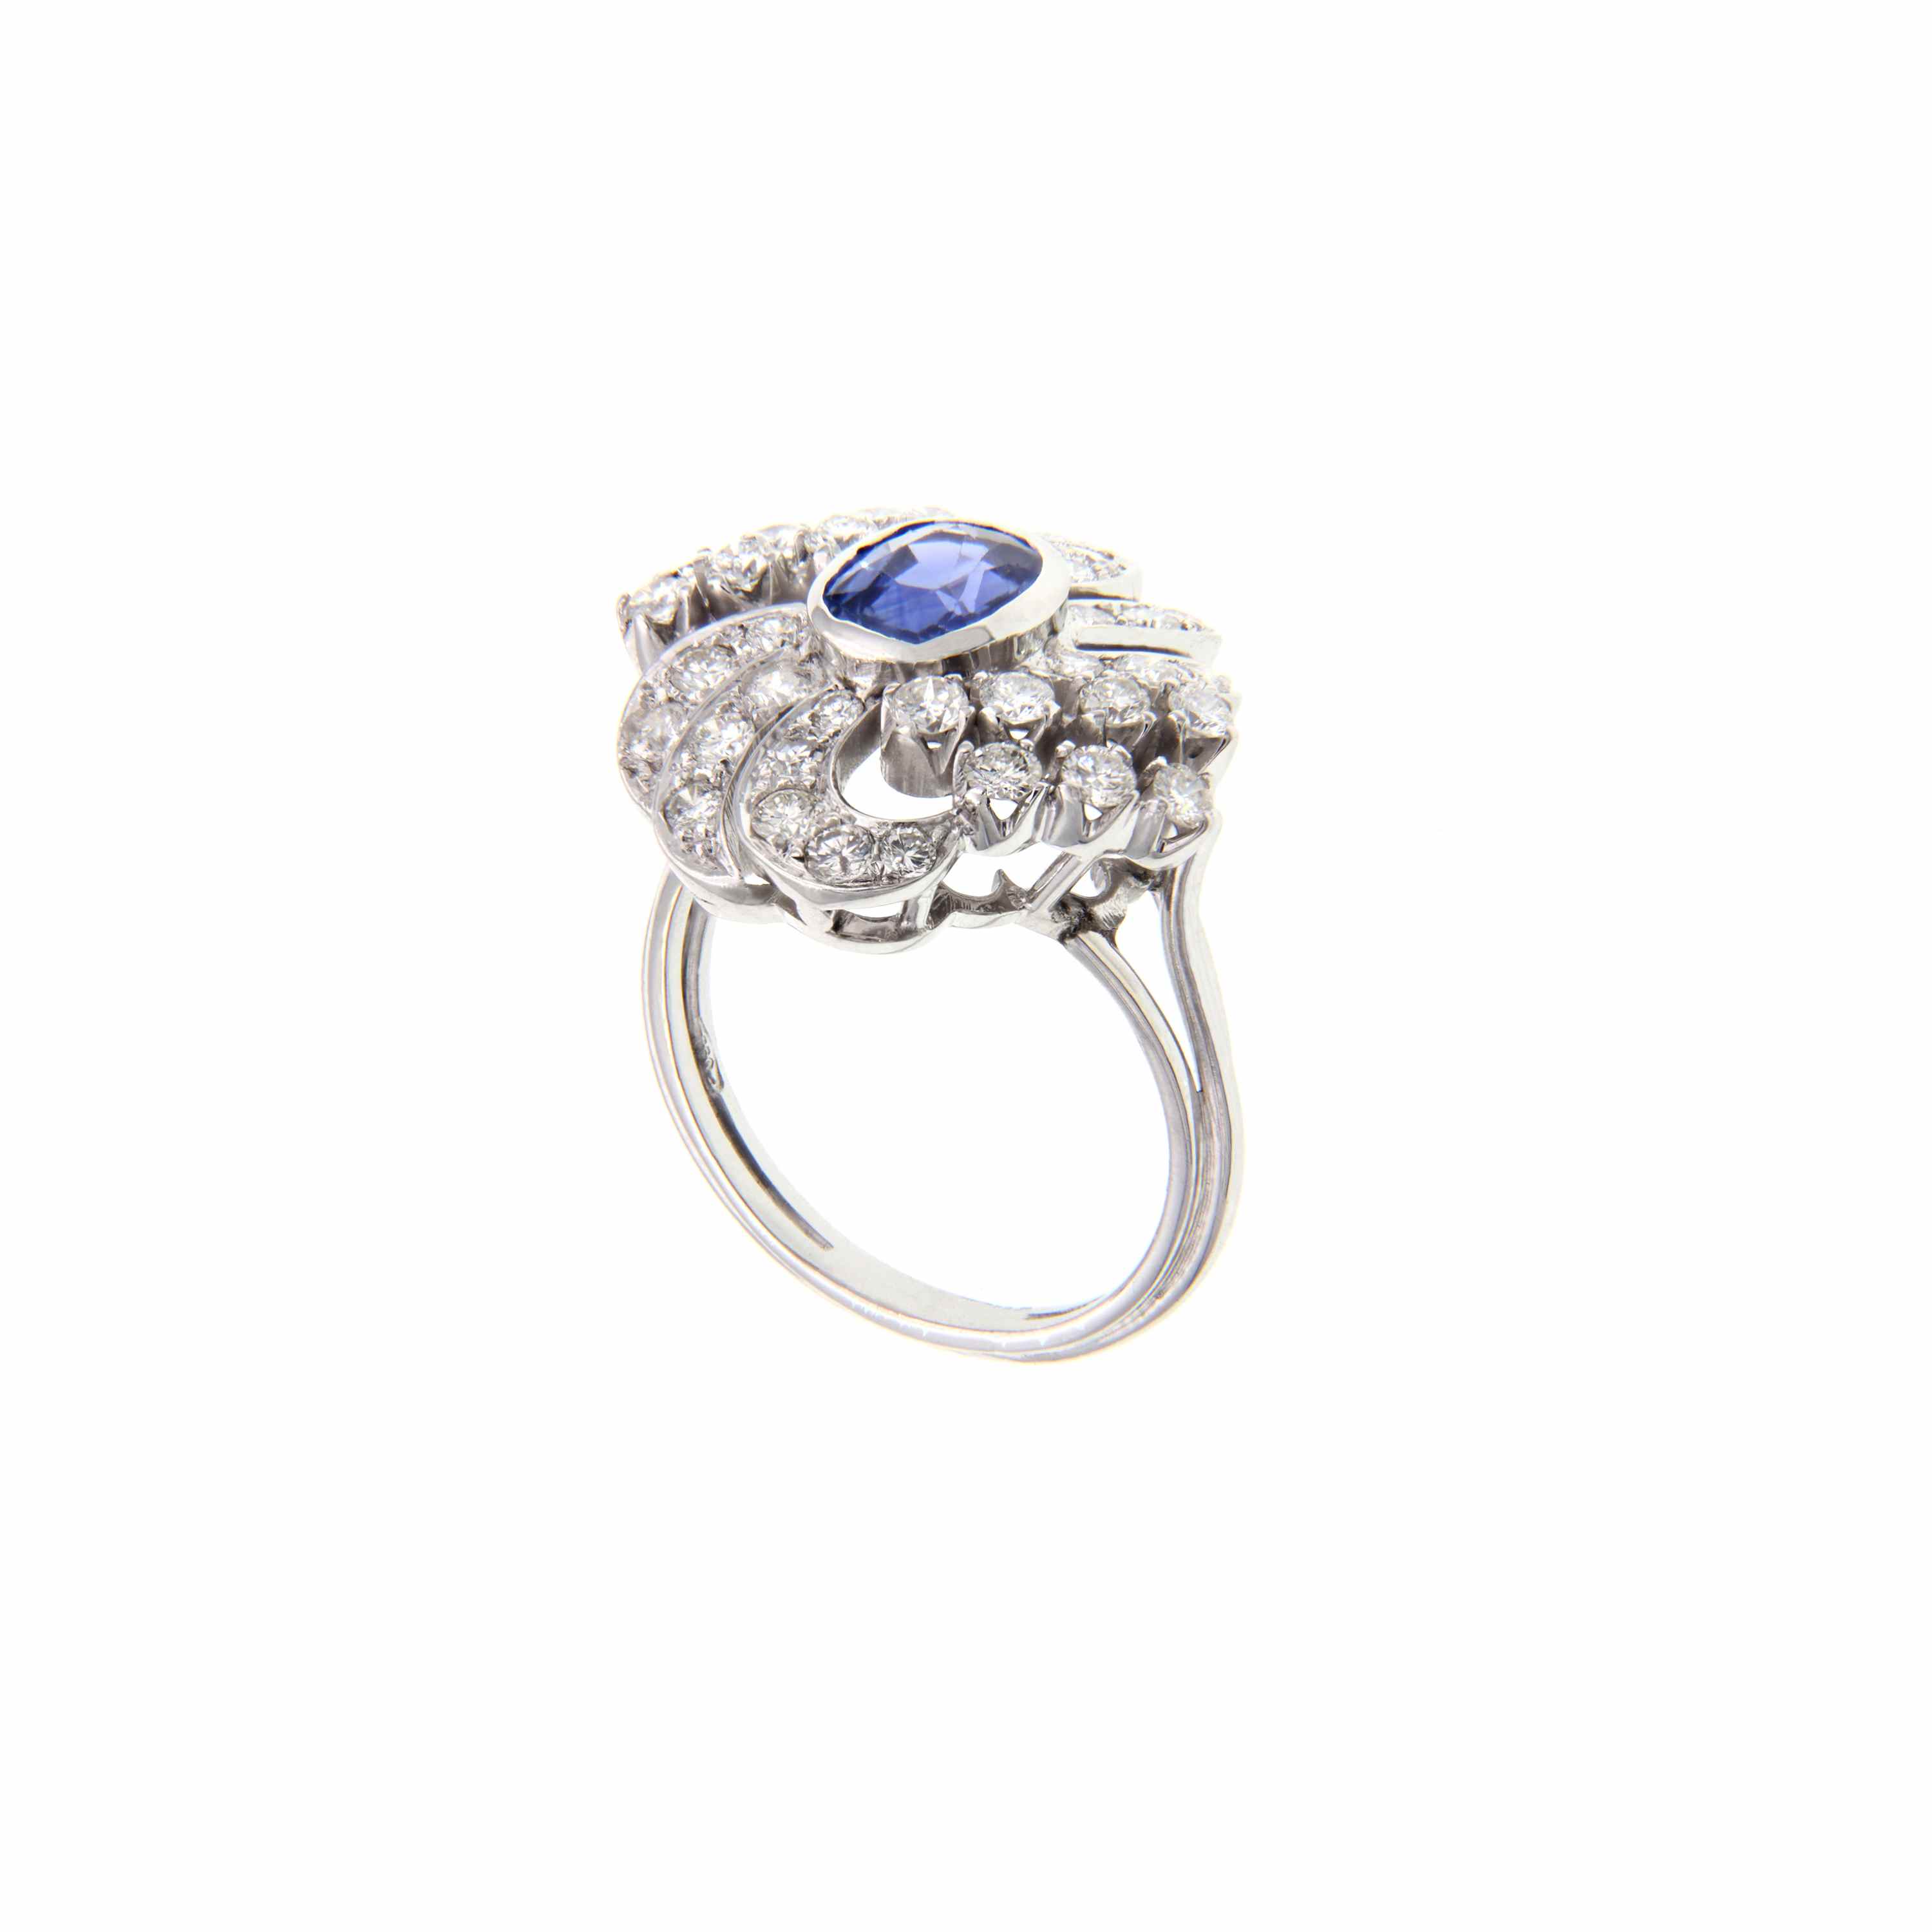 Sapphire Engagement Ring Guide - The Natural Sapphire Company Blog